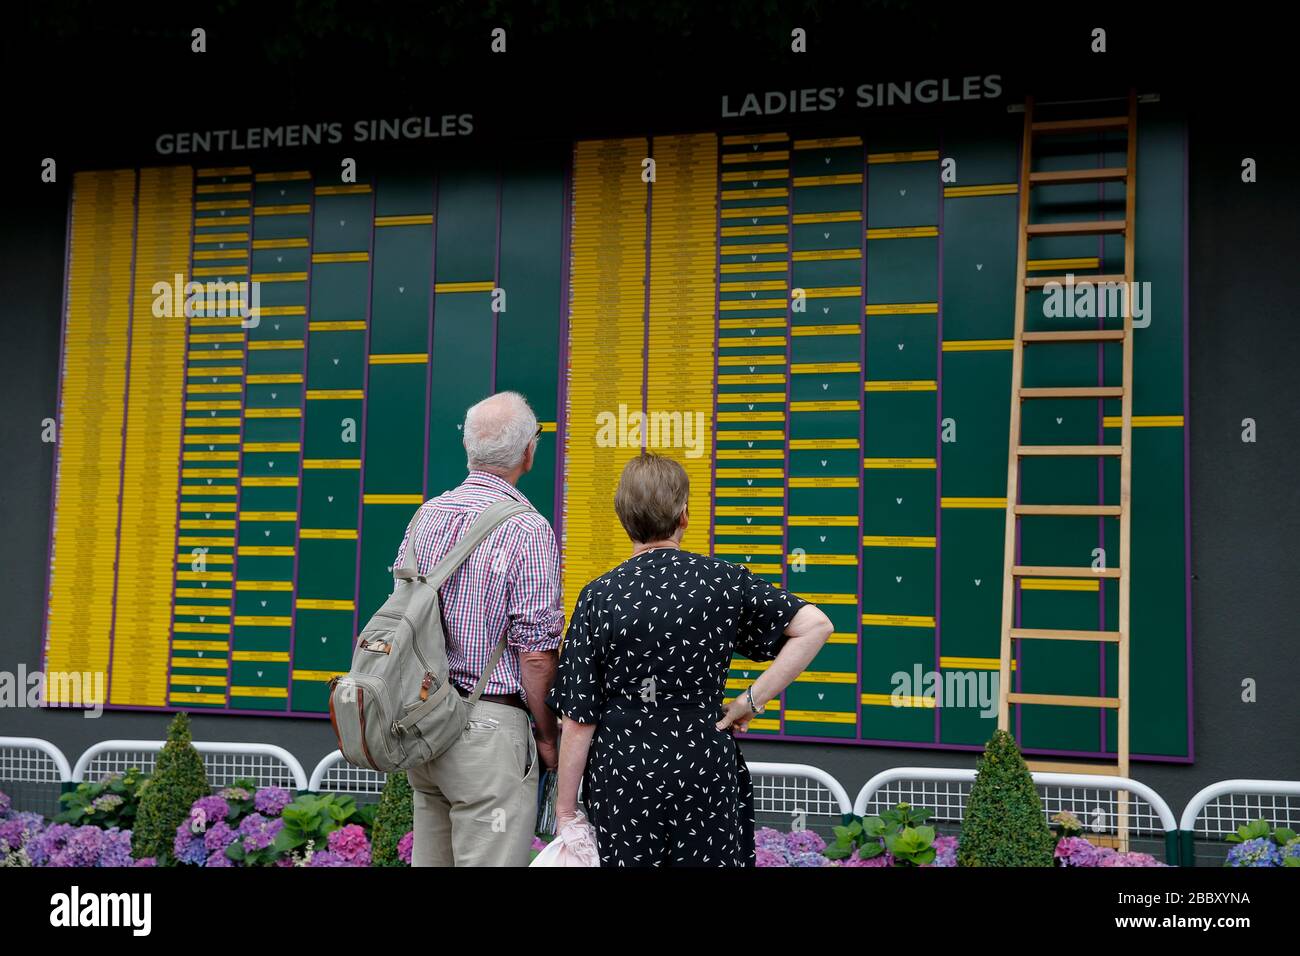 London, UK. 9th July, 2019. File photo taken on July 9, 2019 shows people looking at the order of play during Day 8 of the 2019 Wimbledon Tennis Championships in London, Britain. This year's Wimbledon has been cancelled due to the public health concerns related to the ongoing COVID-19 pandemic, the All England Club (AELTC) announced after an emergency meeting on Wednesday. Credit: Han Yan/Xinhua/Alamy Live News Stock Photo